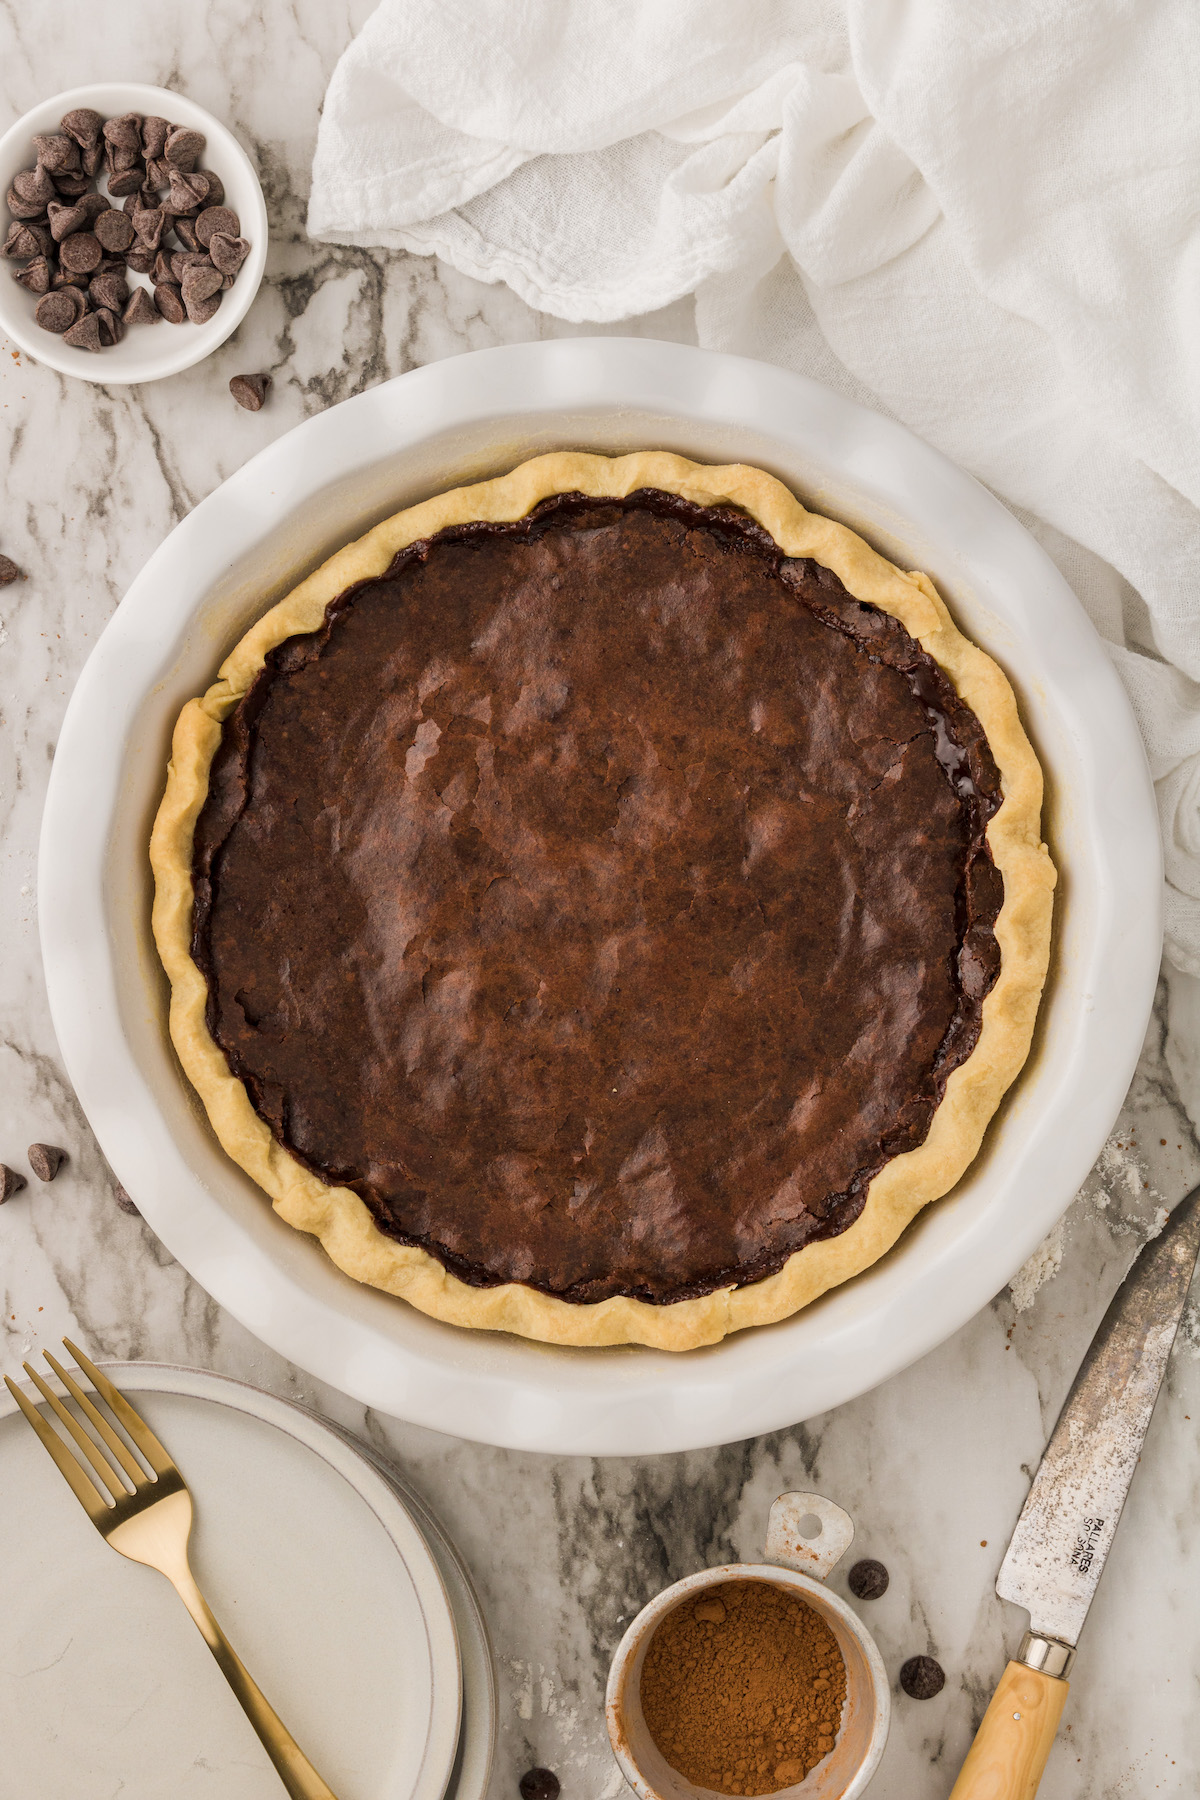 Overhead view of whole vegan chocolate chess pie in pie plate